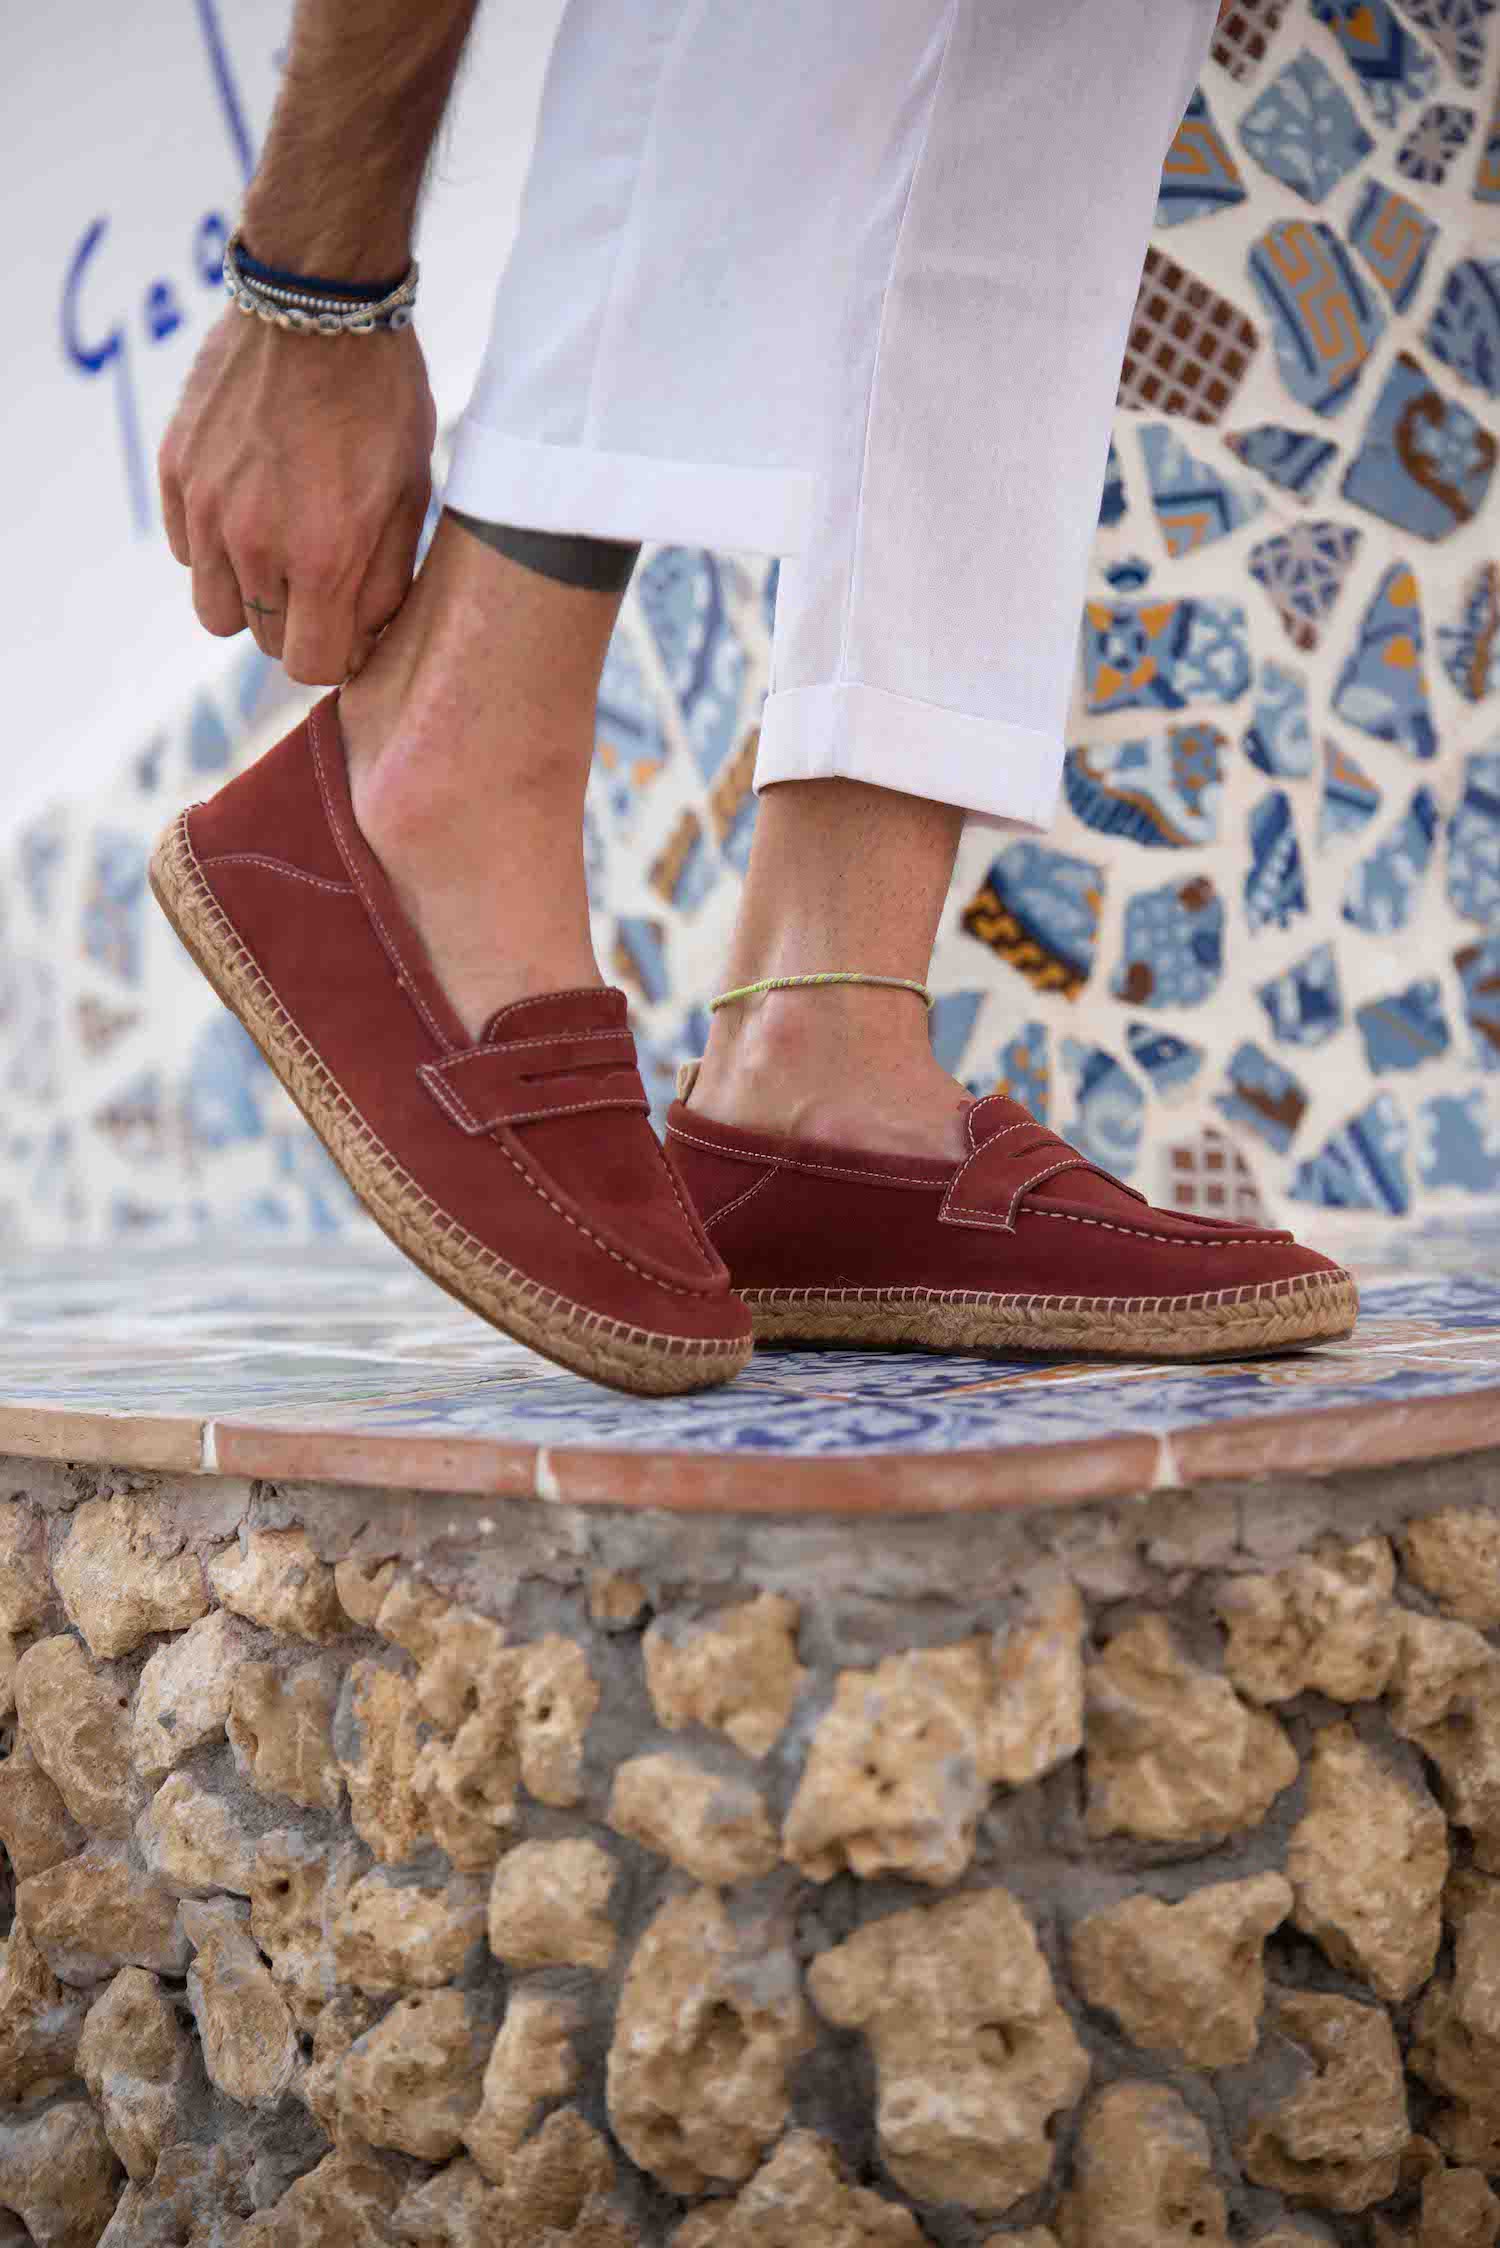 Roma - burgundy suede moccasin with rope sole